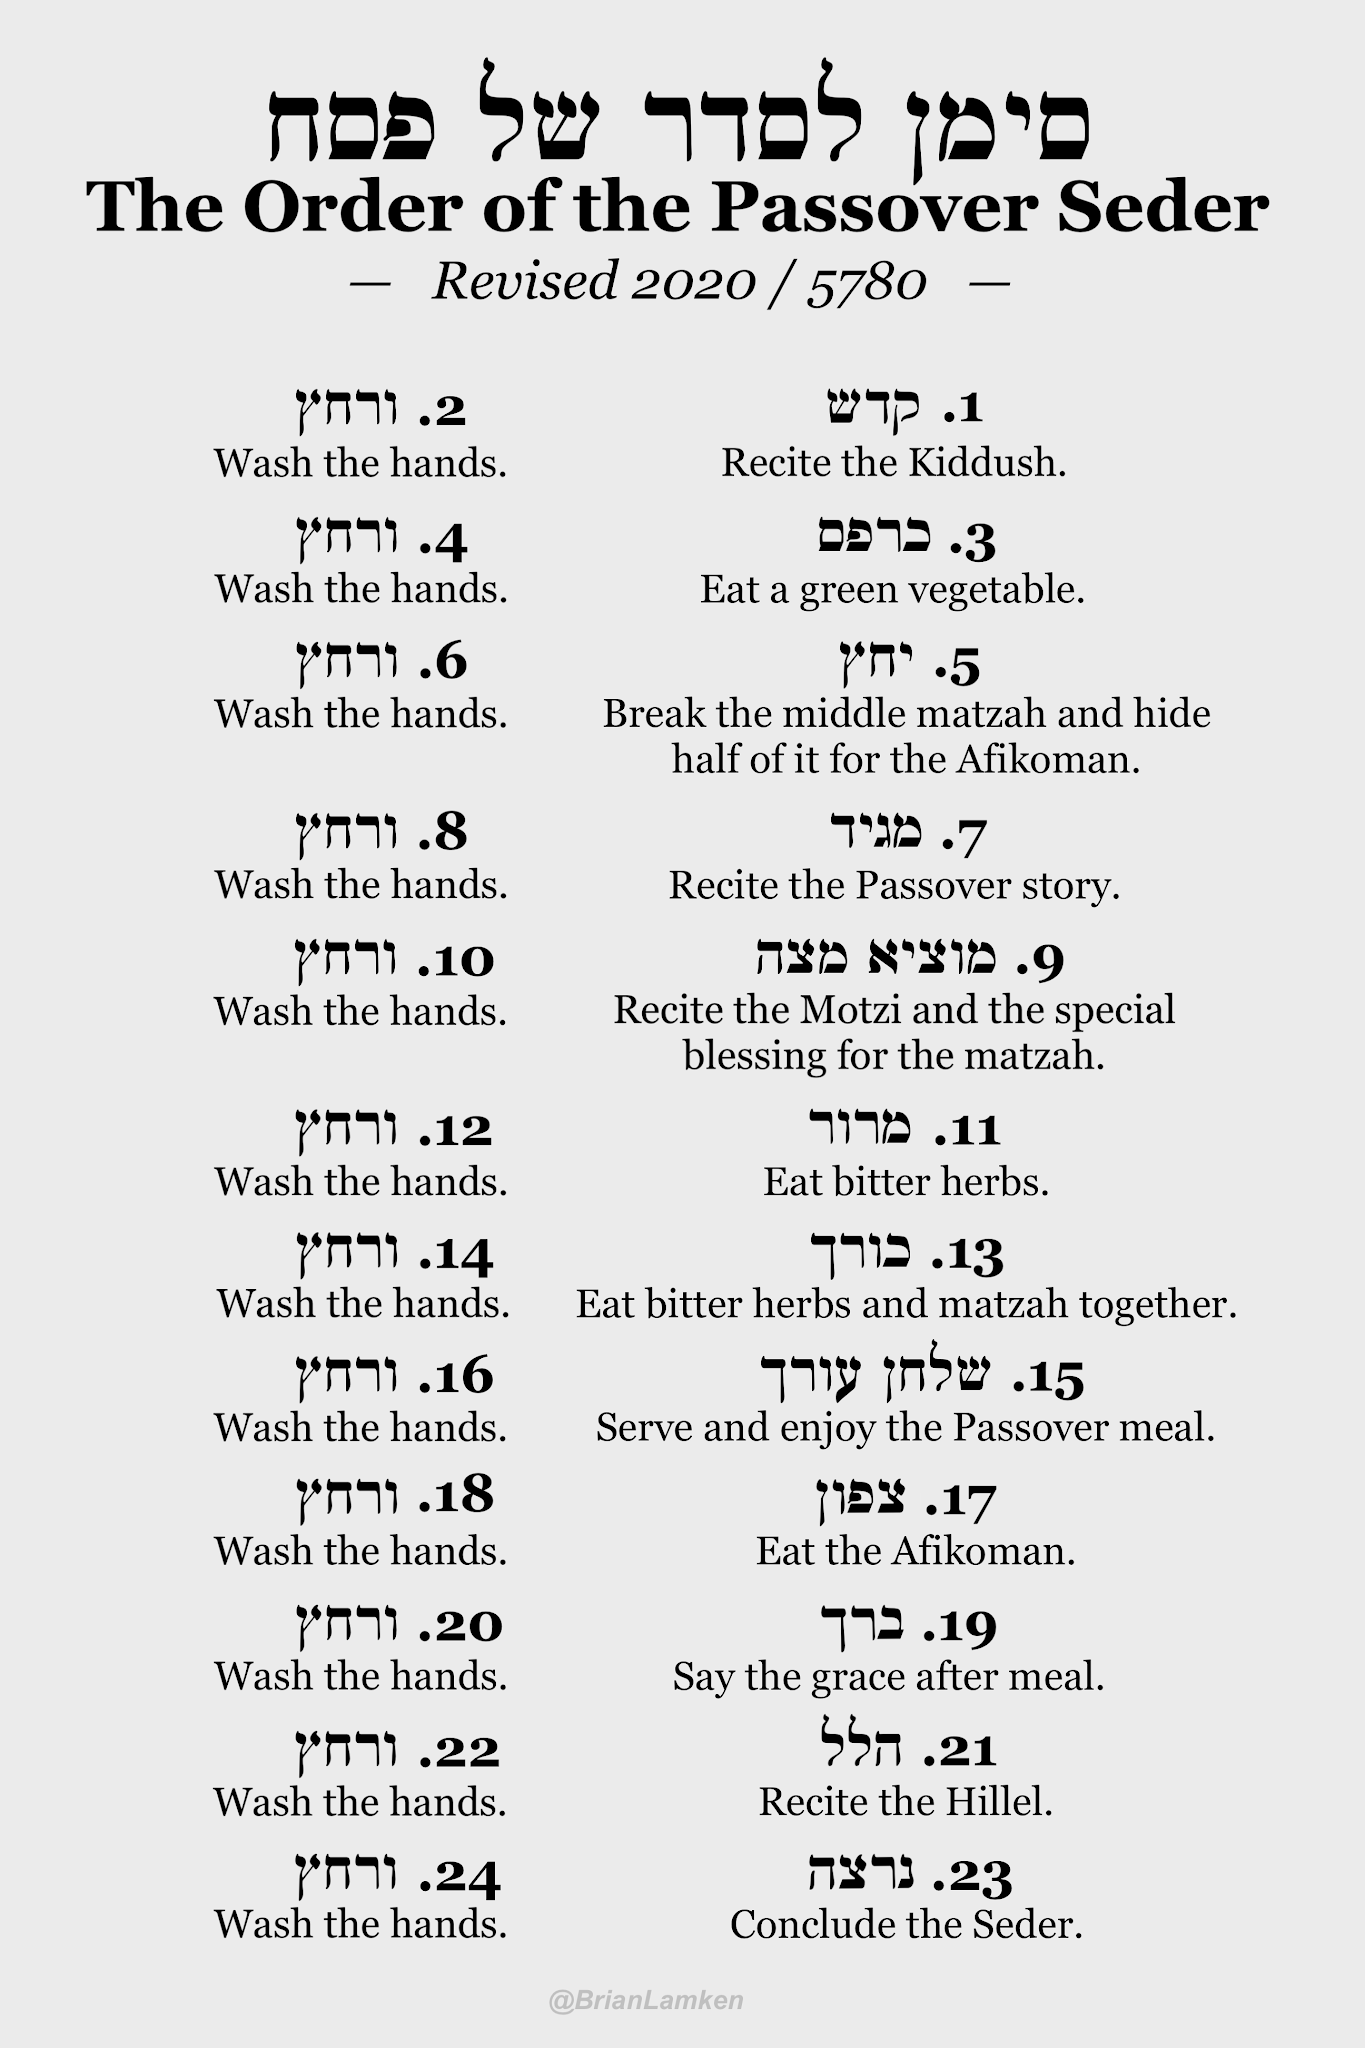 The Order of the Passover Seder Revised 2020 / 5780 with the washing of the hands added after every other step